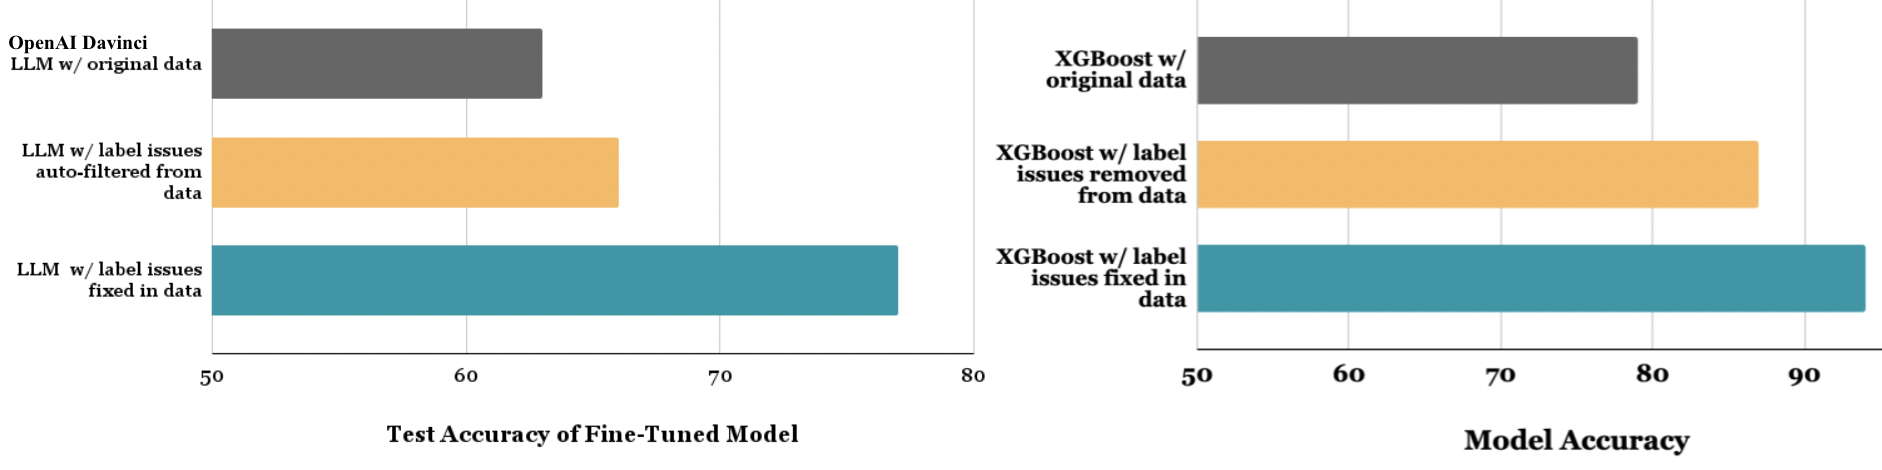 Improving OpenAI LLM and XGBoost models with data issue correction